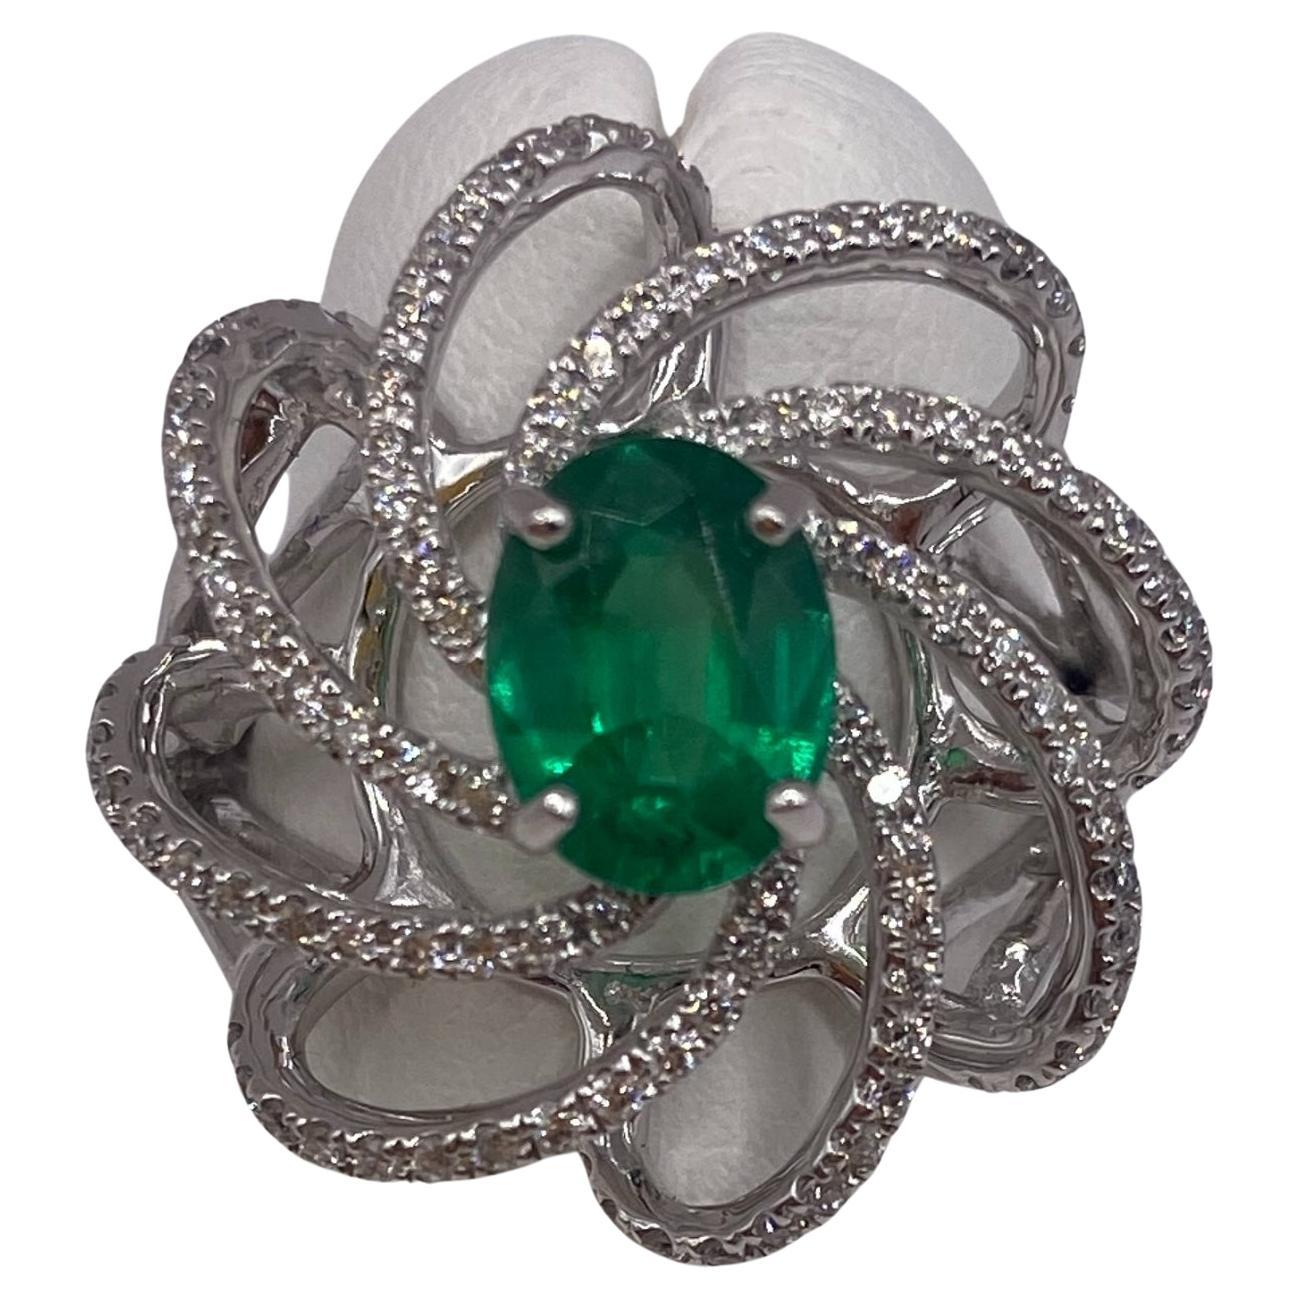 1.61ctw Oval Emerald & Round Diamond Ring in 18KT White Gold